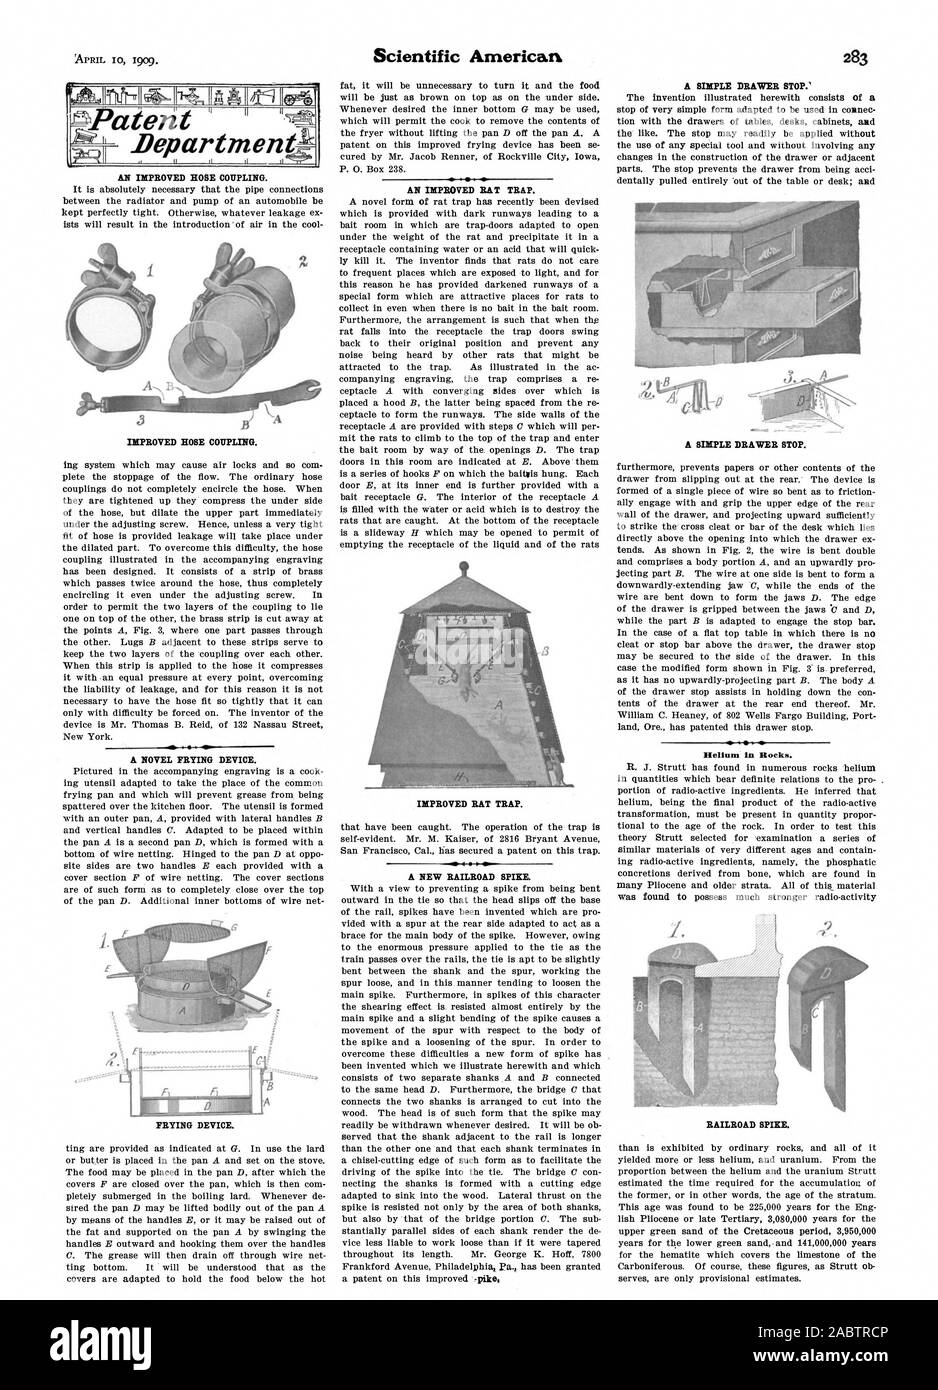 APRIL 10 1909. AN IMPROVED HOSE COUPLING. IMPROVED HOSE COUPLING. FRYING DEVICE. Scientific American AN IMPROVED RAT TRAP. IMPROVED RAT TRAP. A NEW RAILROAD SPIKE. Helium in Hocks. RAILROAD SPIKE., -1909-04-10 Stock Photo